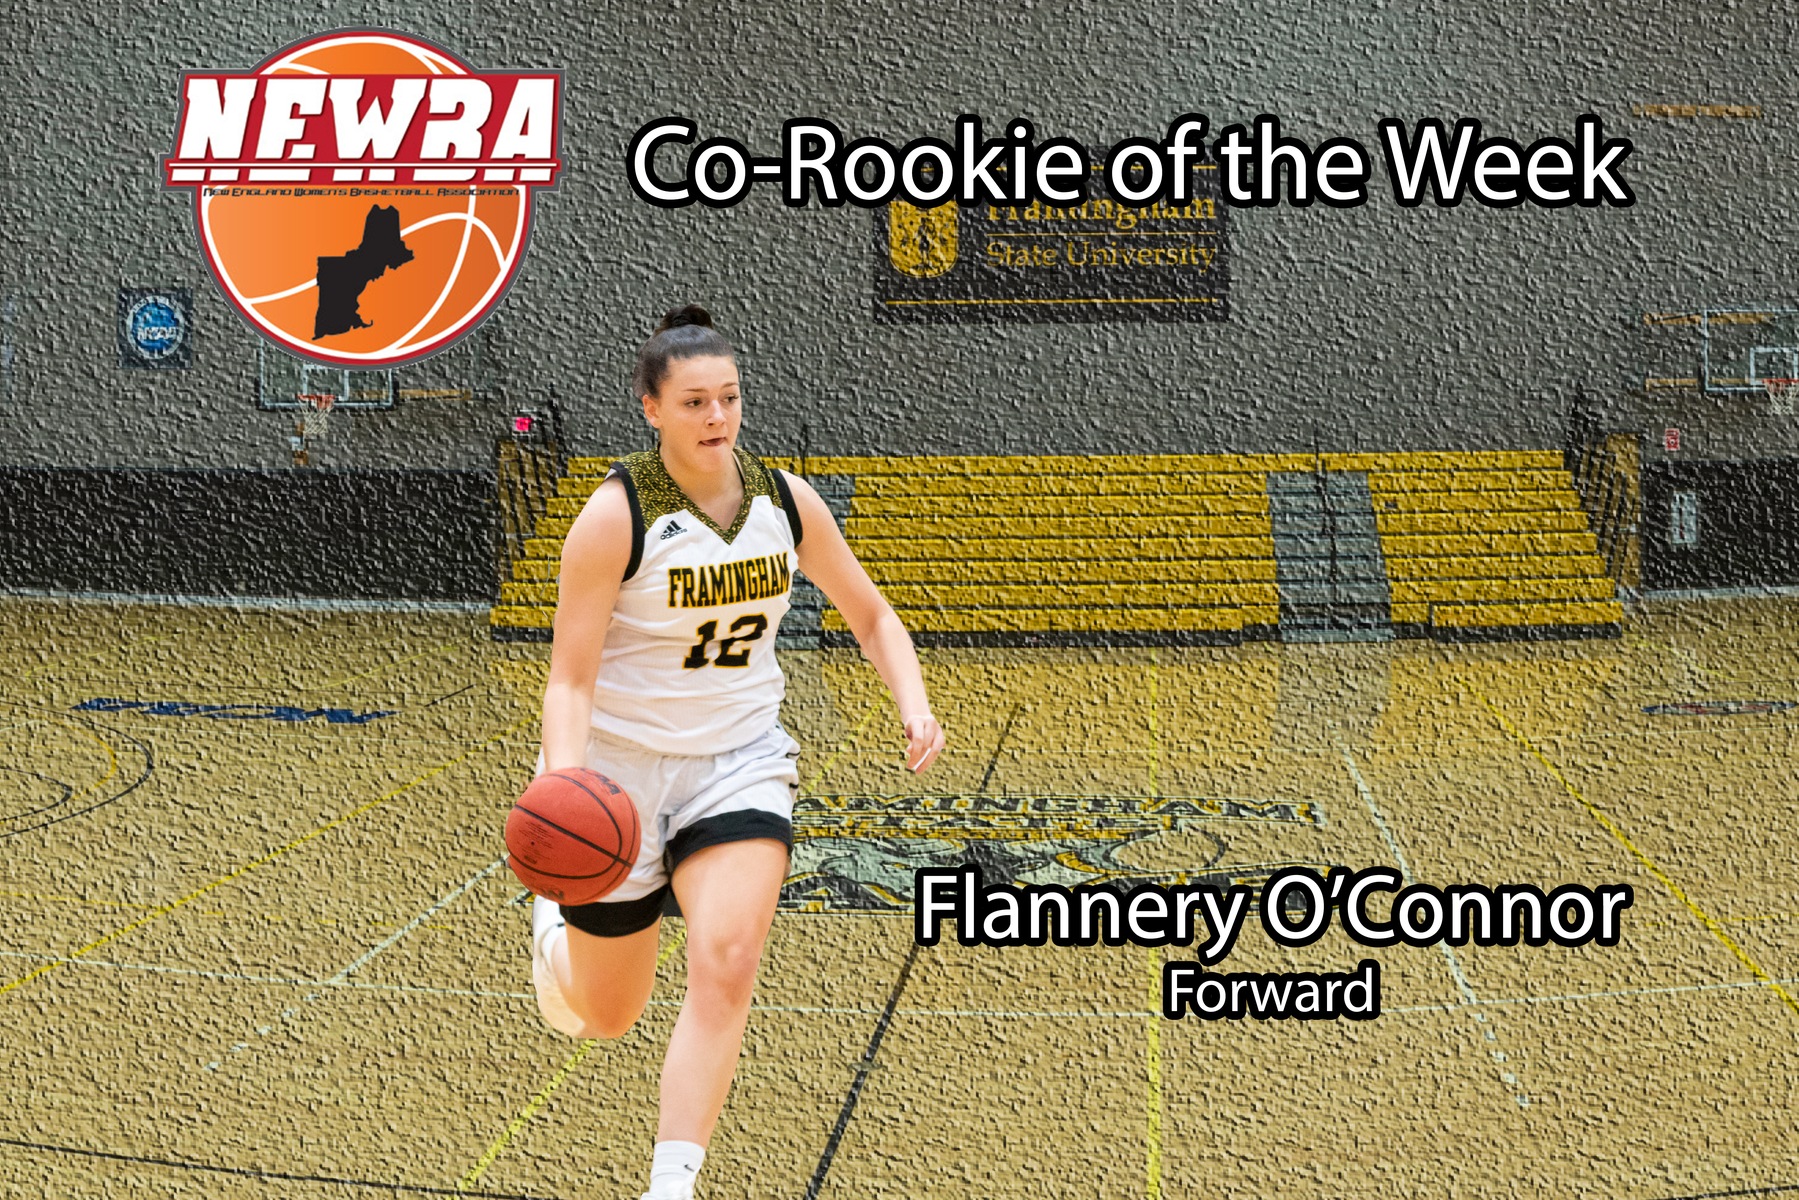 O’Connor Chosen as NEWBA Co-Rookie of the Week